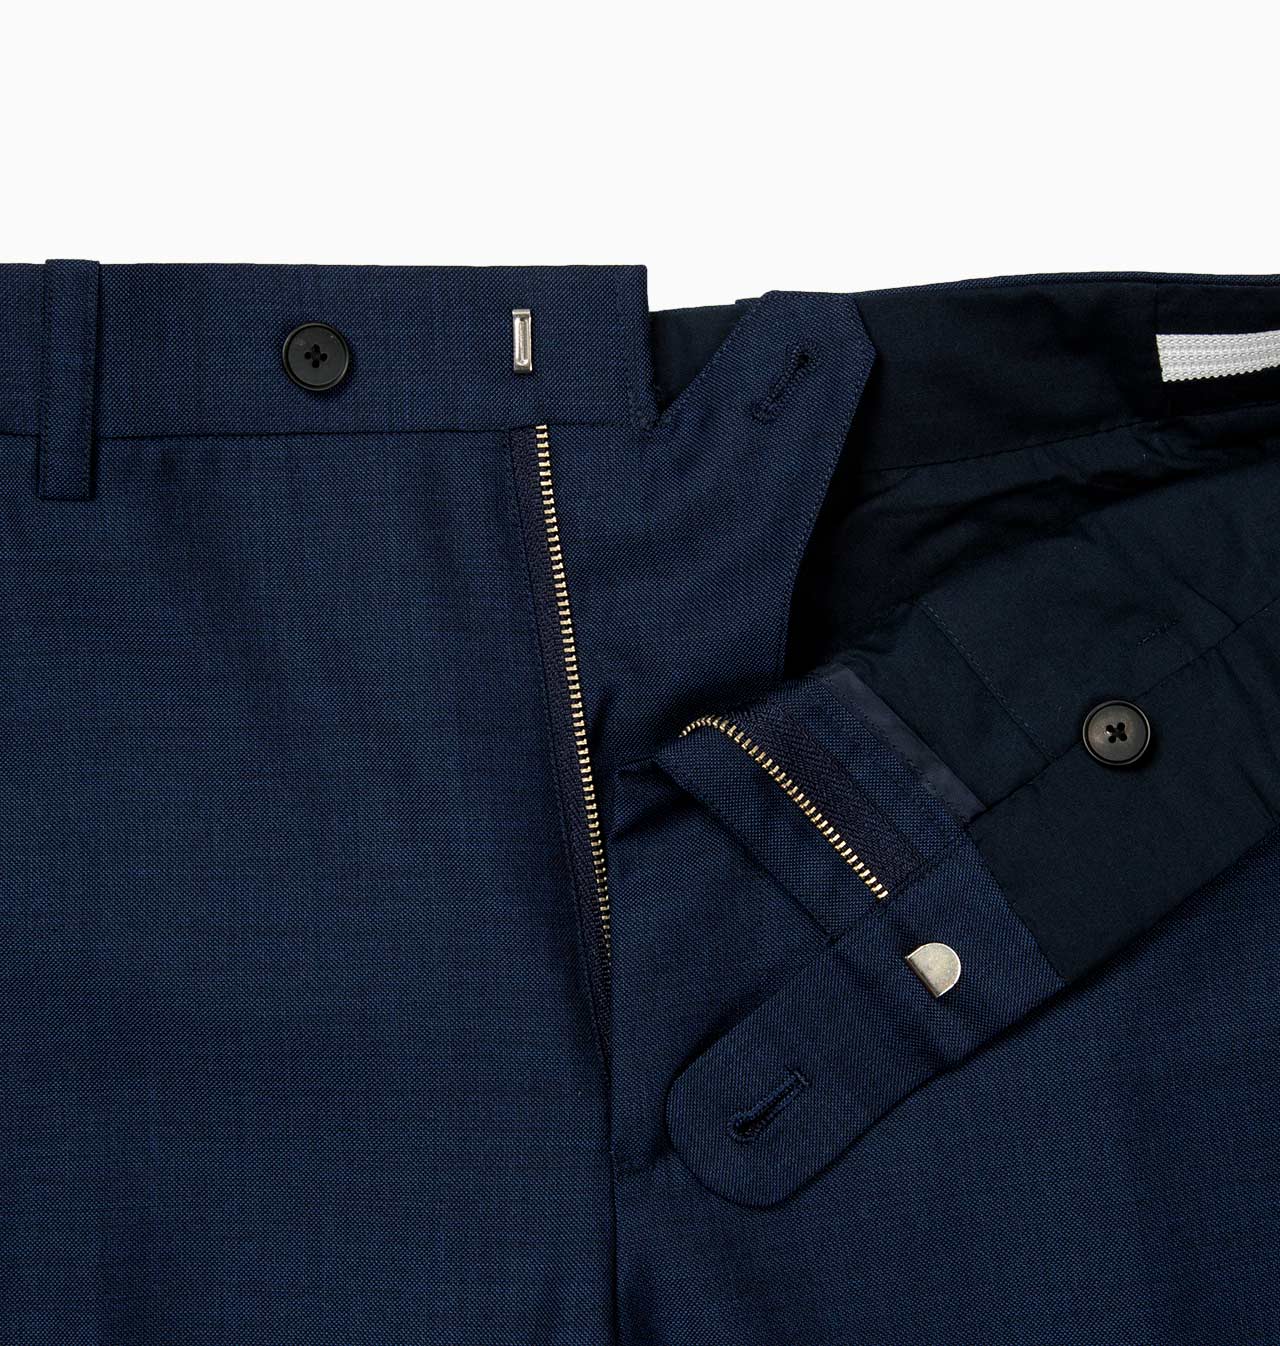 Navy Blue Worsted / T4005 - Suiting